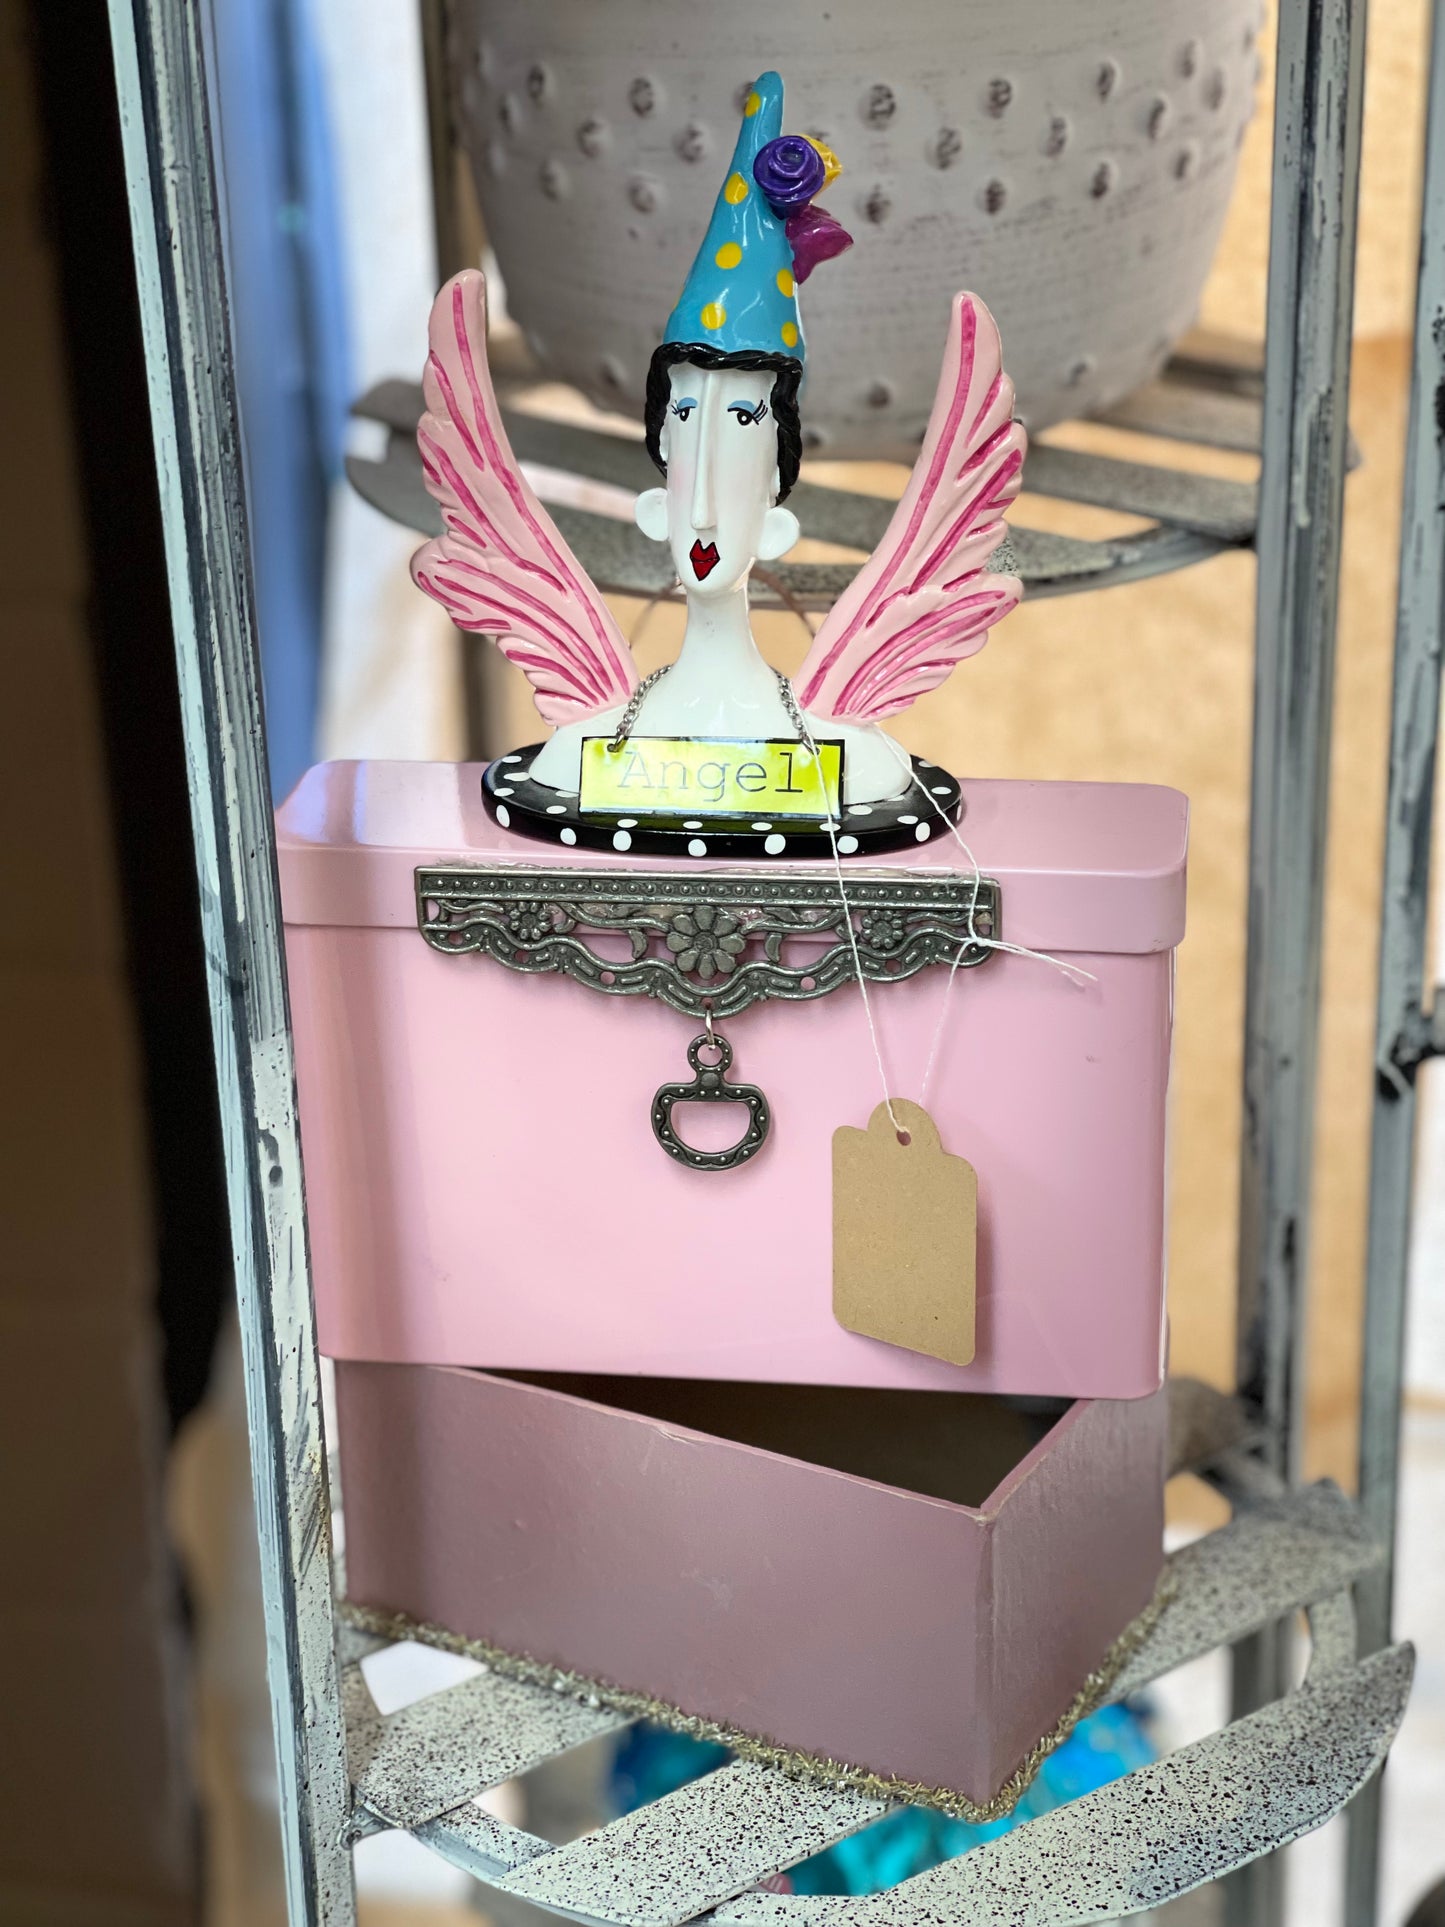 Found object assemblage art - angel box pink